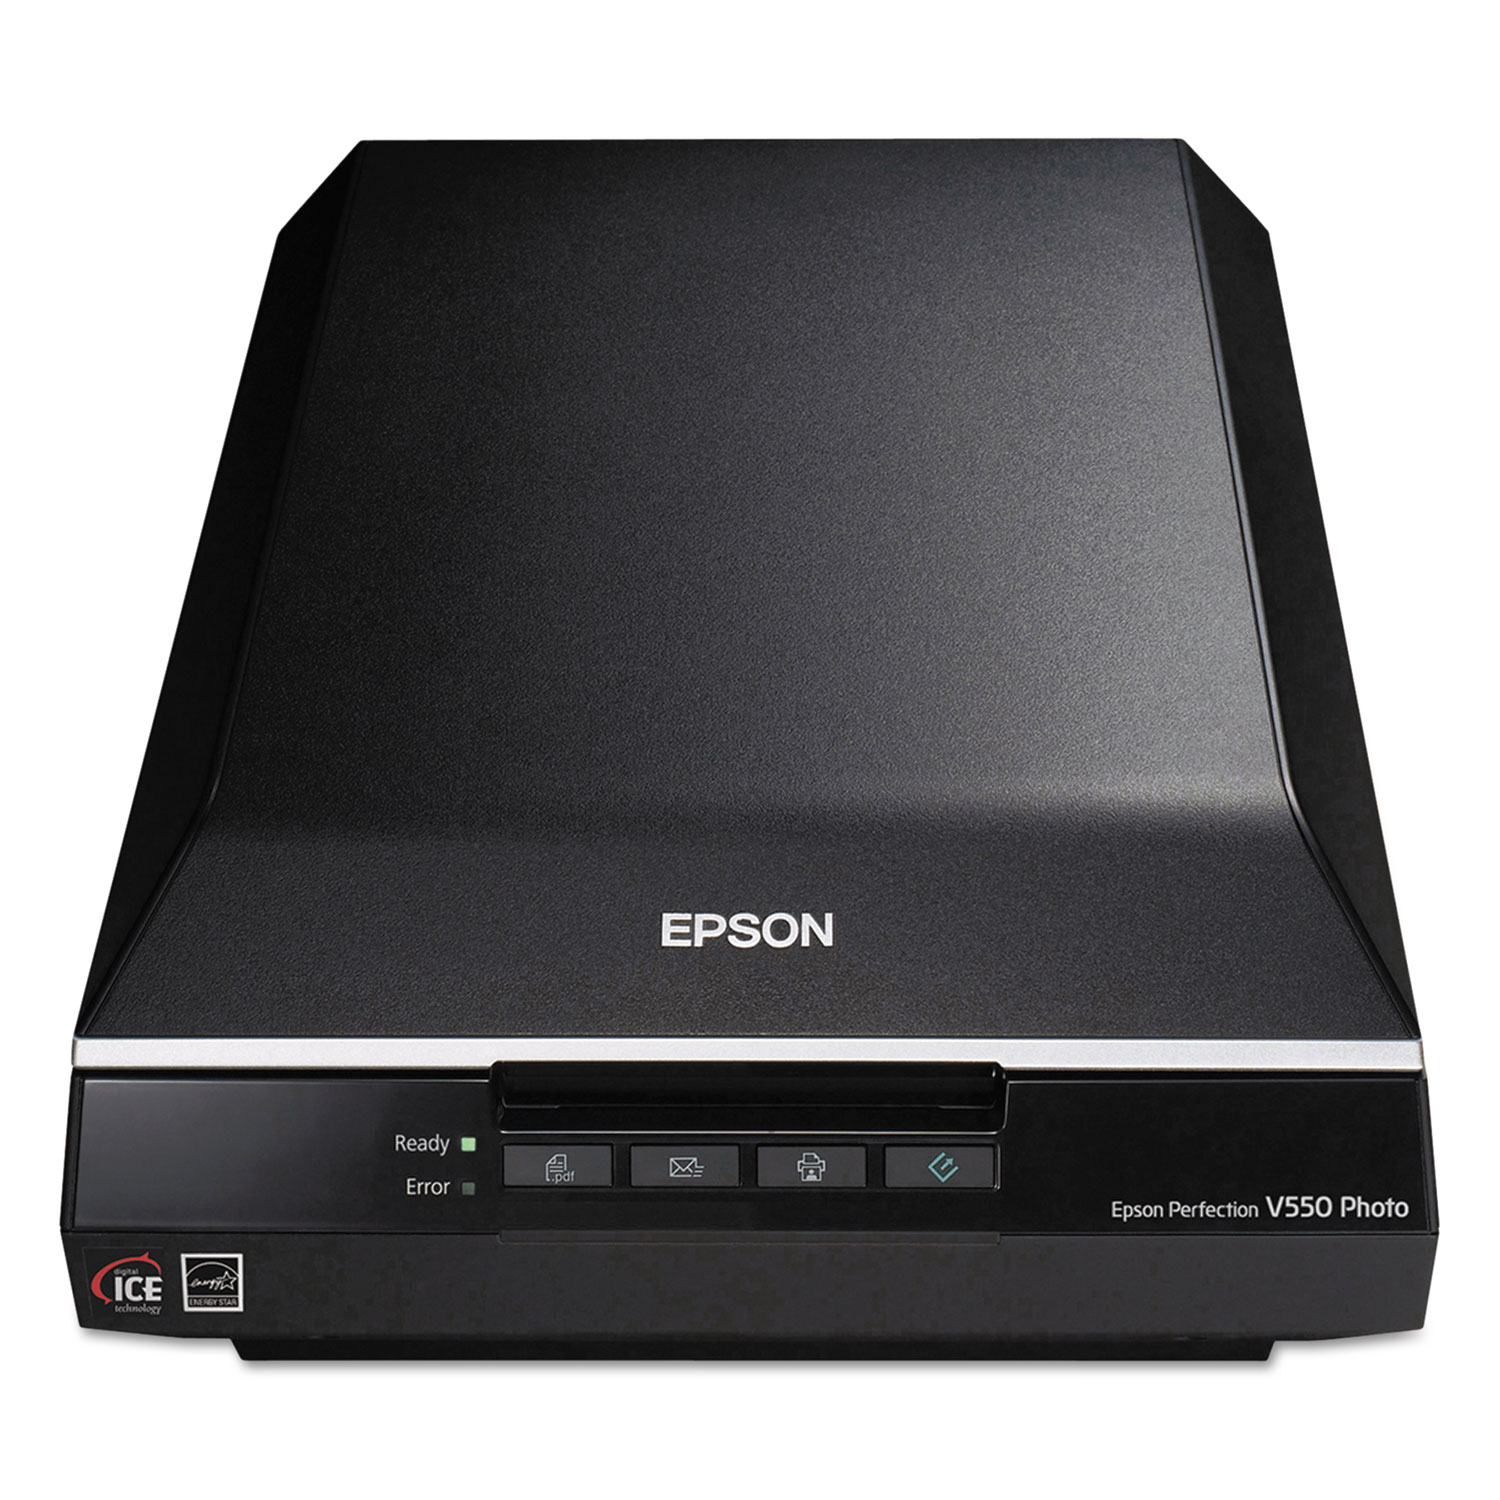  Epson B11B210201 Perfection V550 Photo Color Scanner, Scans Up to 17 x 22, 6400 dpi Optical Resolution (EPSB11B210201) 